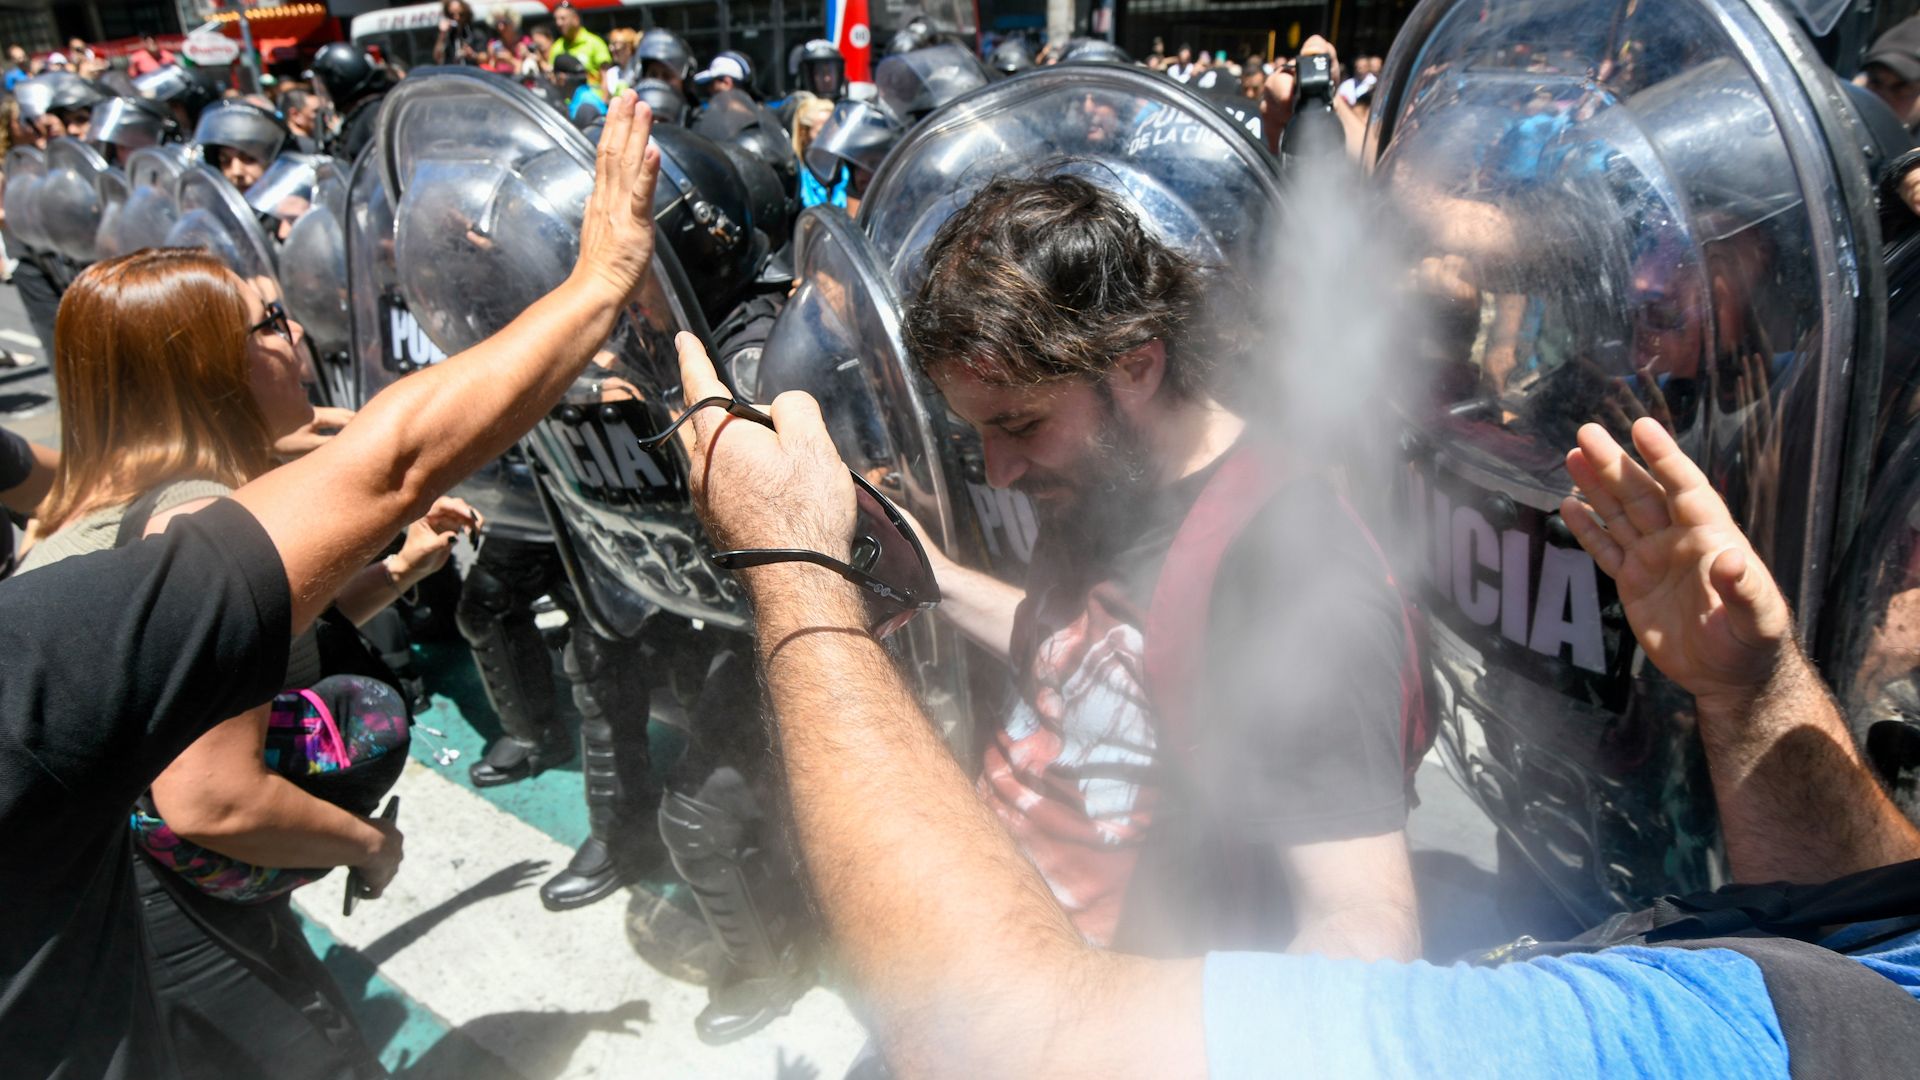 Tear gas uses as anti-government protesters face off in Argentina